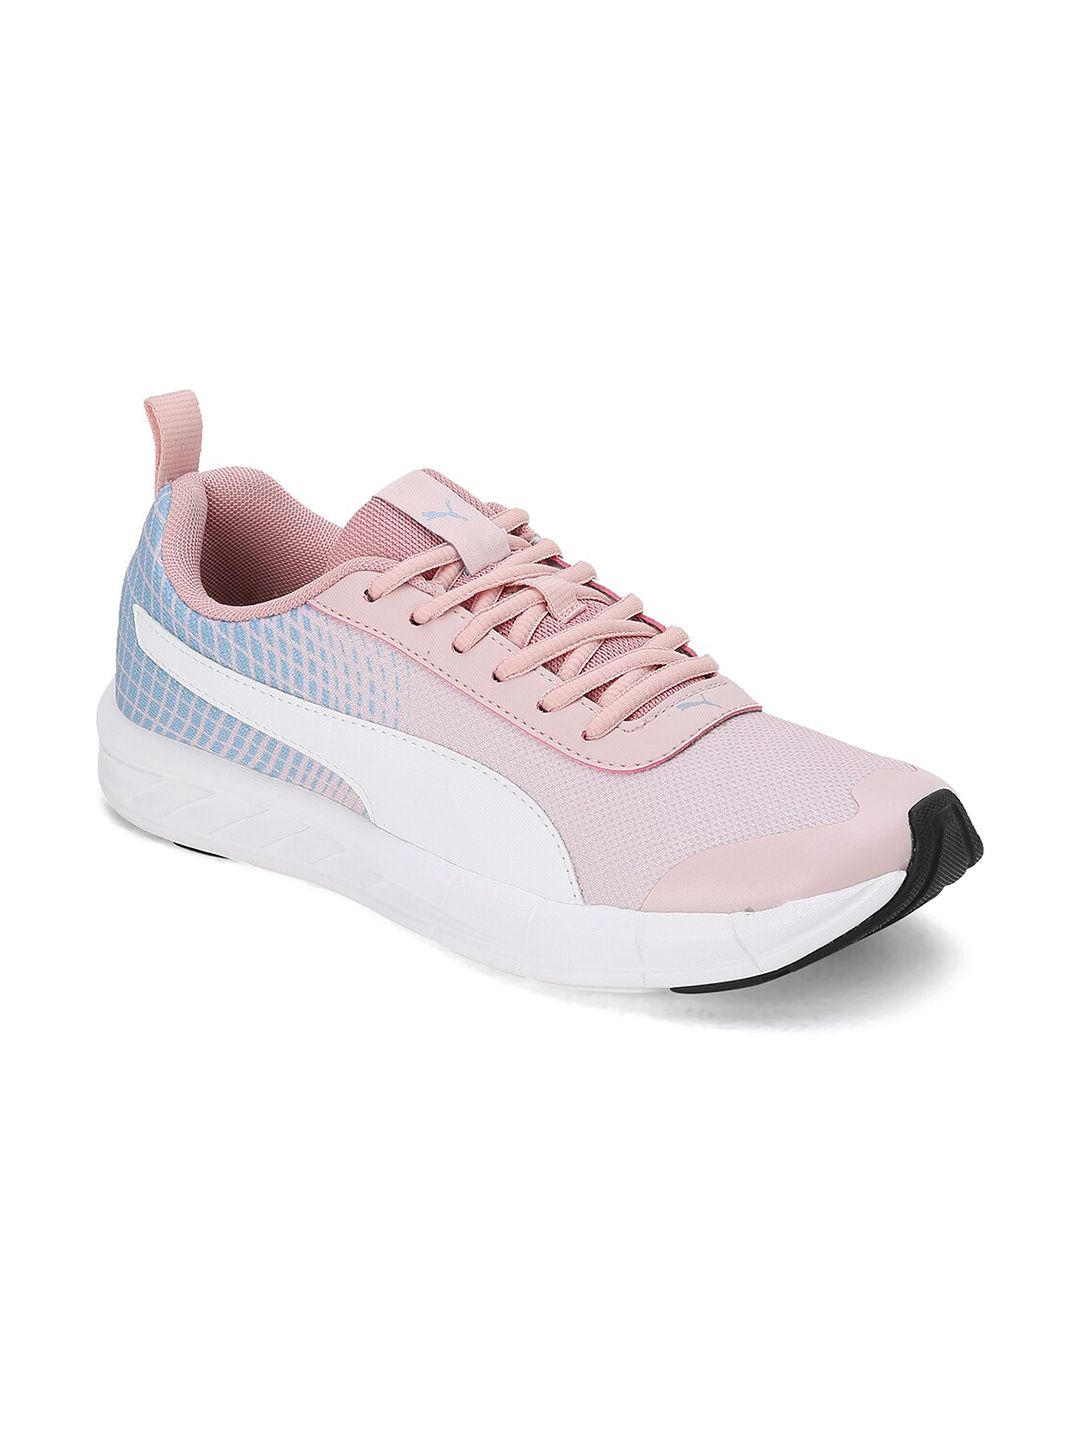 Puma Women Pink Textile Supernal V3 Running Shoes Price in India